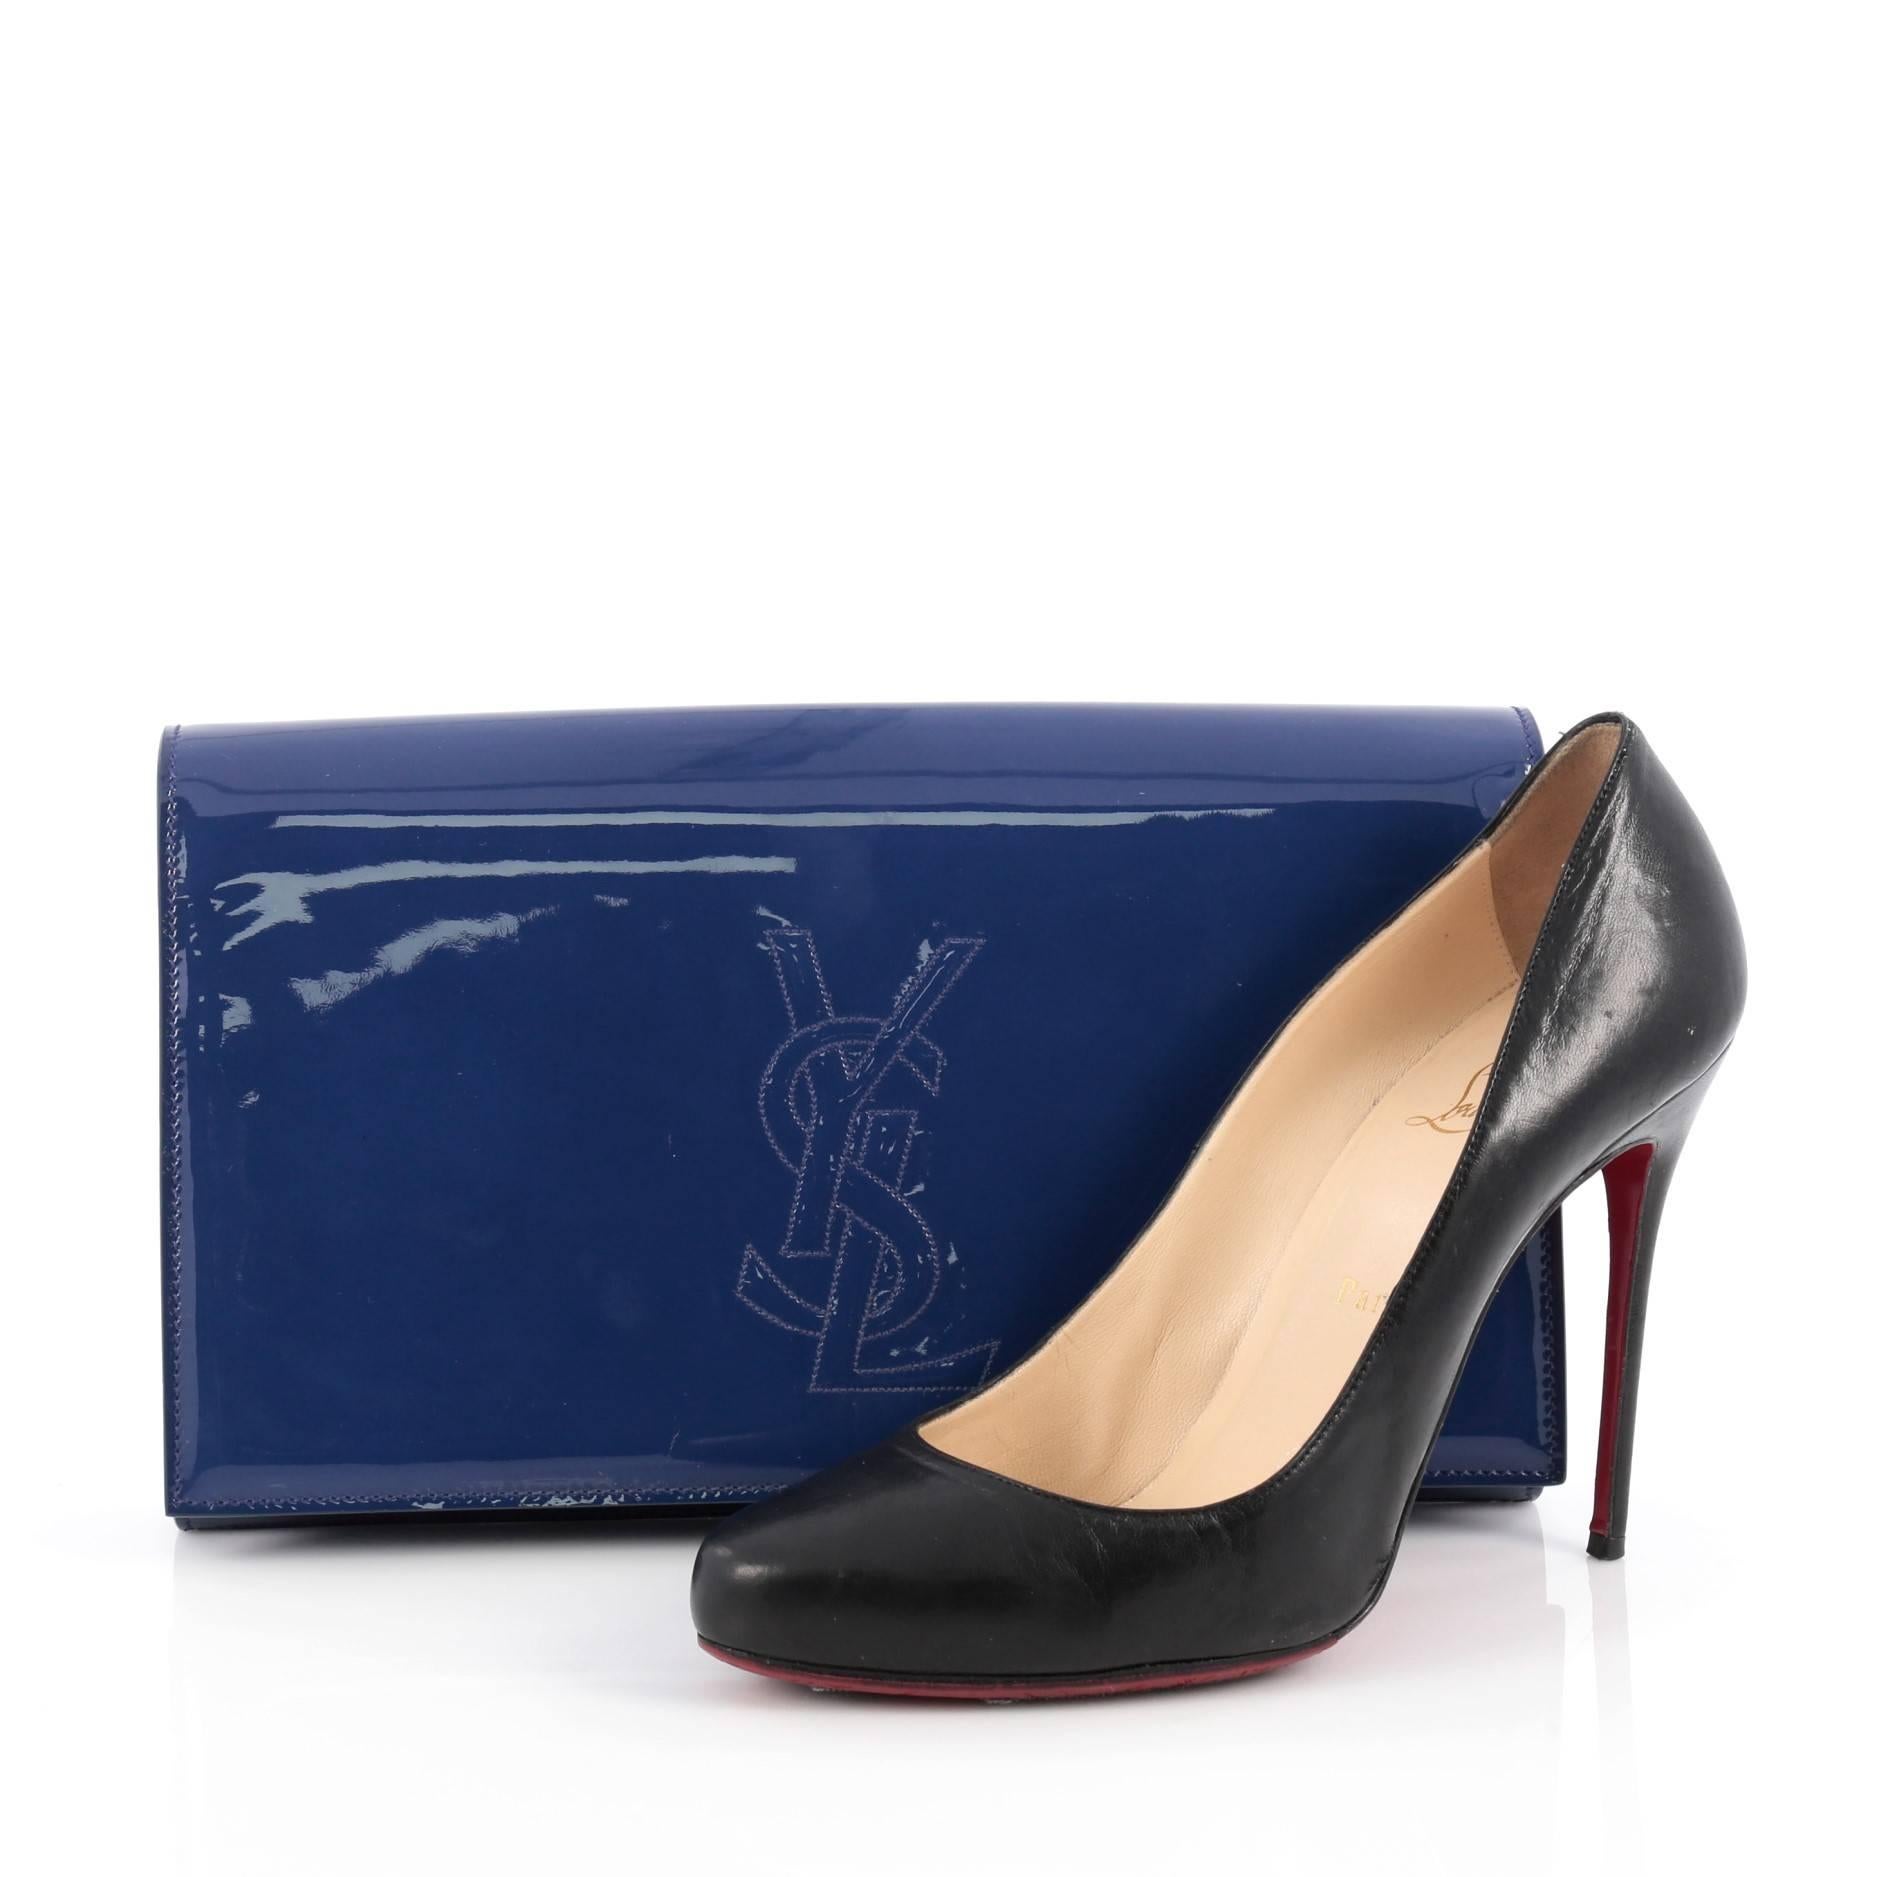 This authentic Saint Laurent Belle de Jour Clutch Patent Large is a chic and glamorous accessory to complement nightly looks. Crafted from luxurious blue patent leather, this clutch features a stitched YSL monogram logo and gold-tone hardware